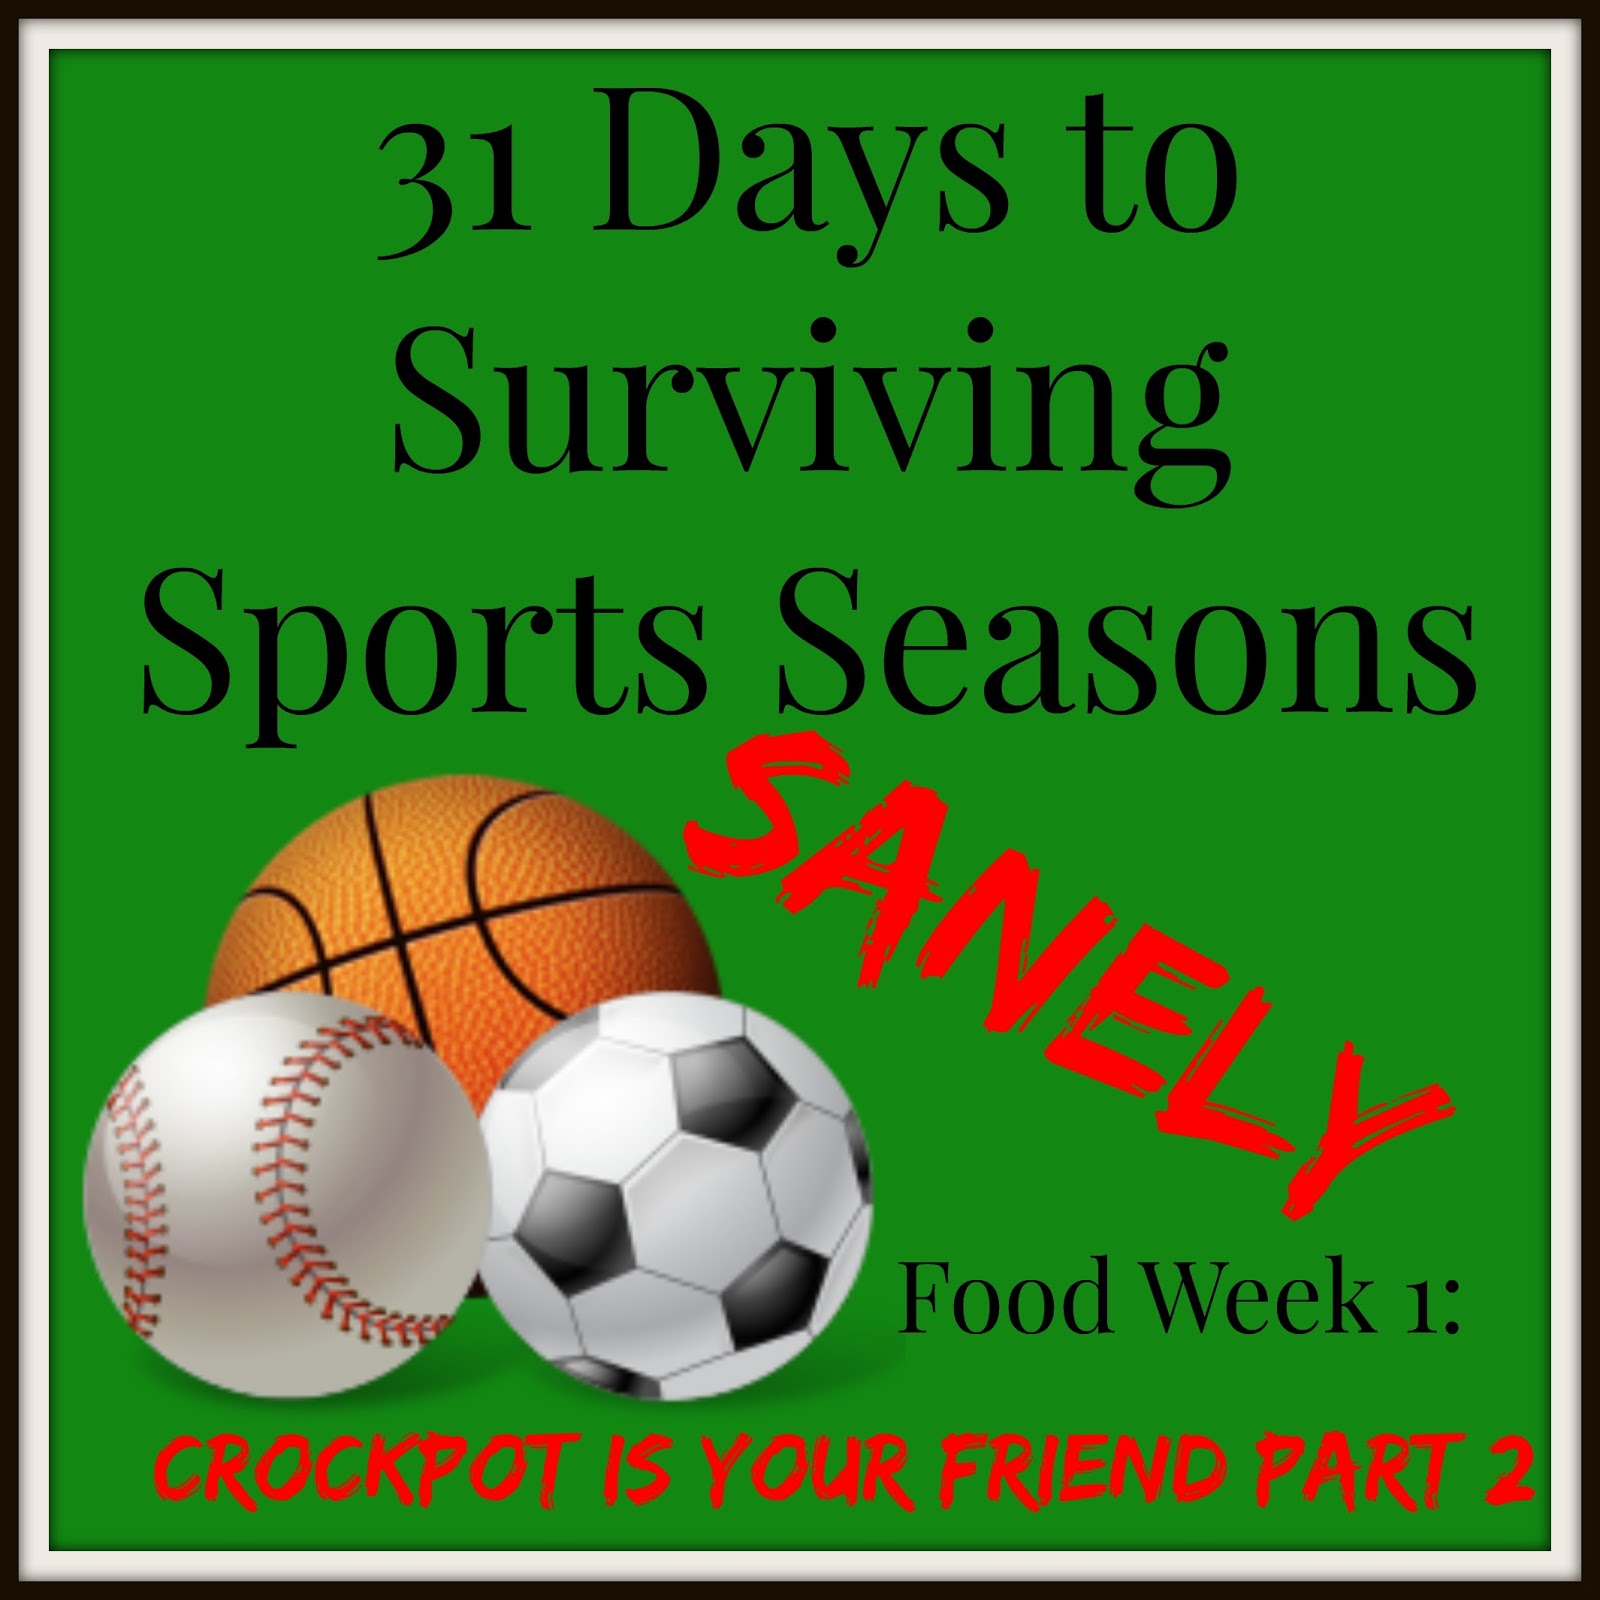 31 Days to Surviving Sports Seasons Sanely: The Crockpot Is Your Friend, Part 2